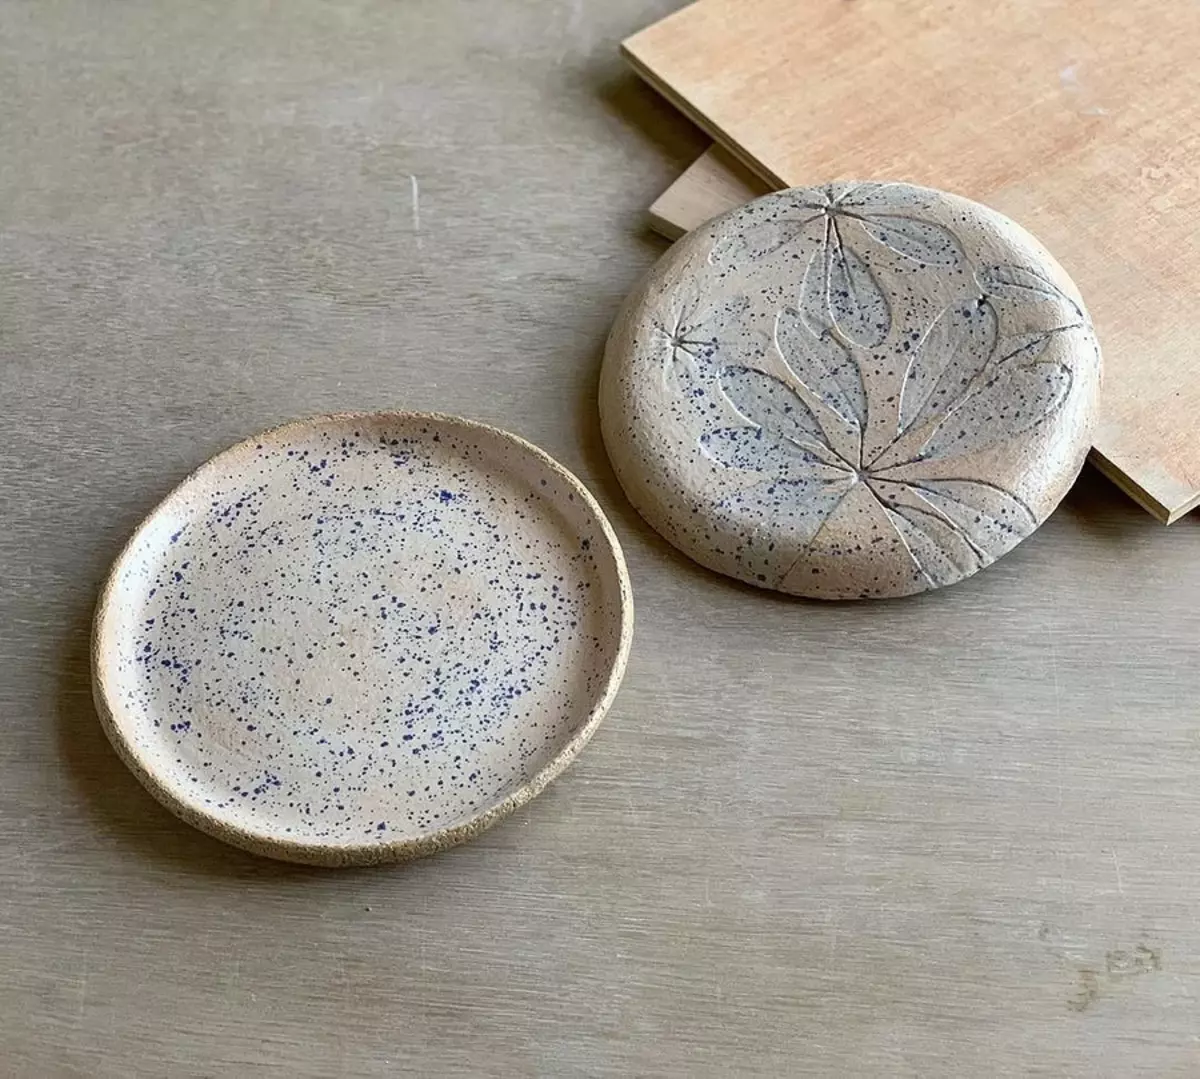 Ceramics with patterns created by nature: Needlework Instagram Week